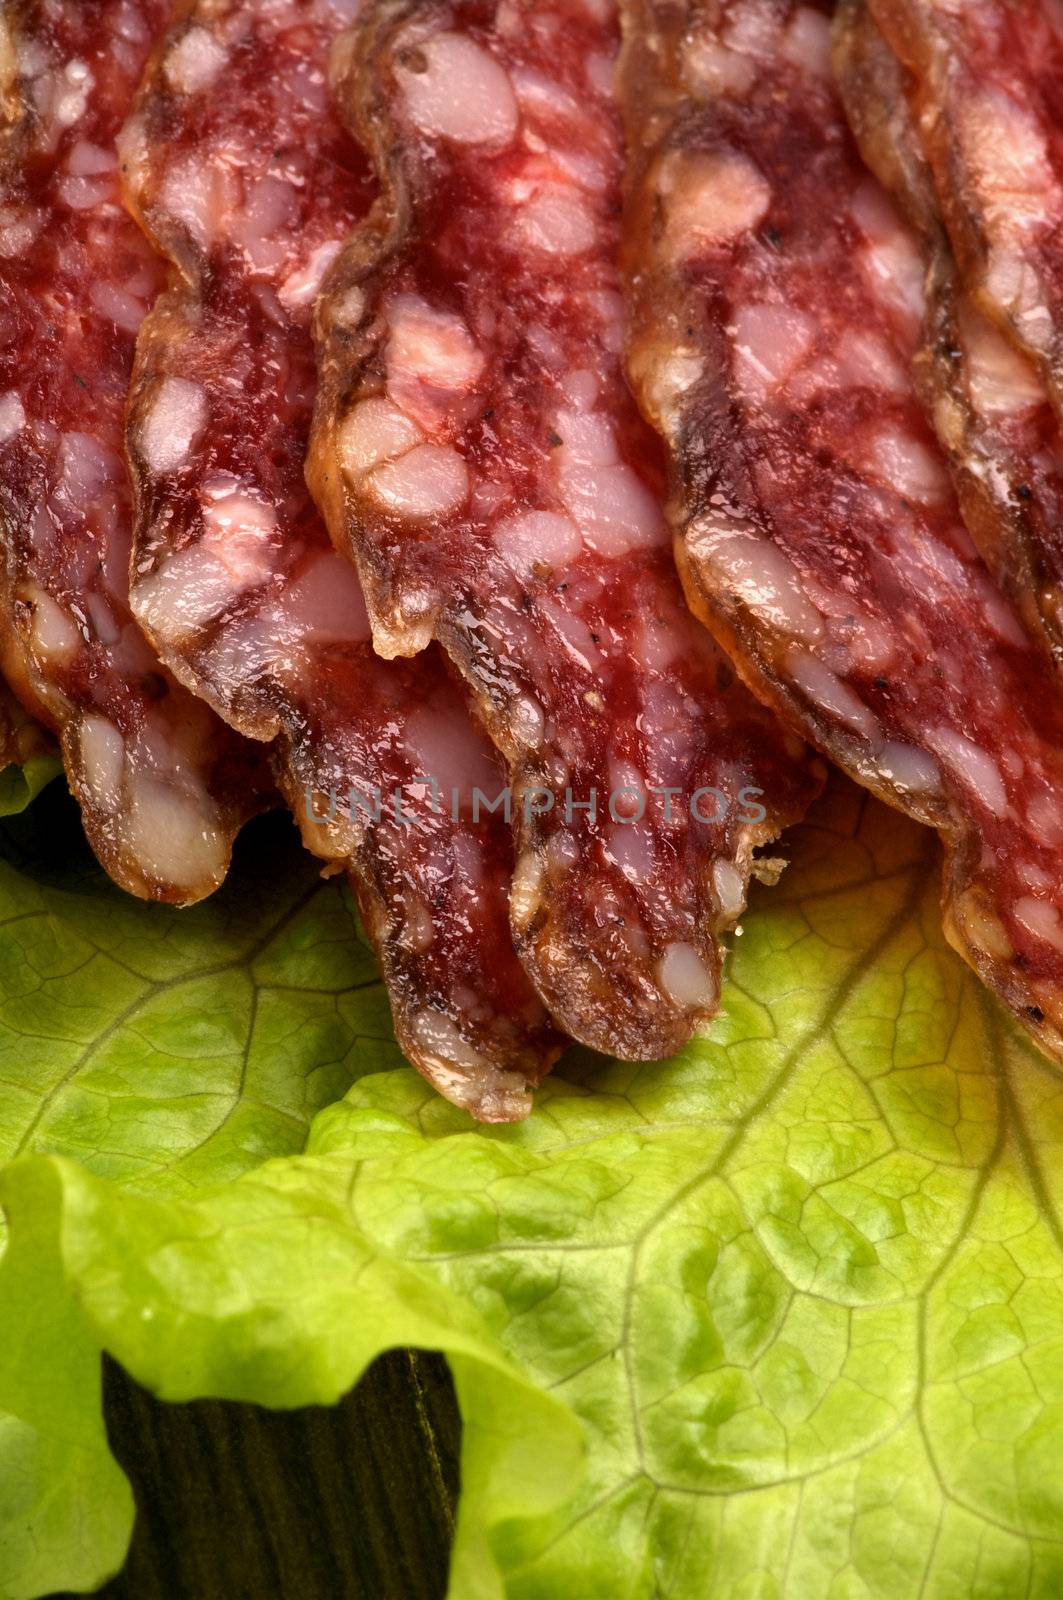 Slices of Smoked Sausage on Lettuce closeup